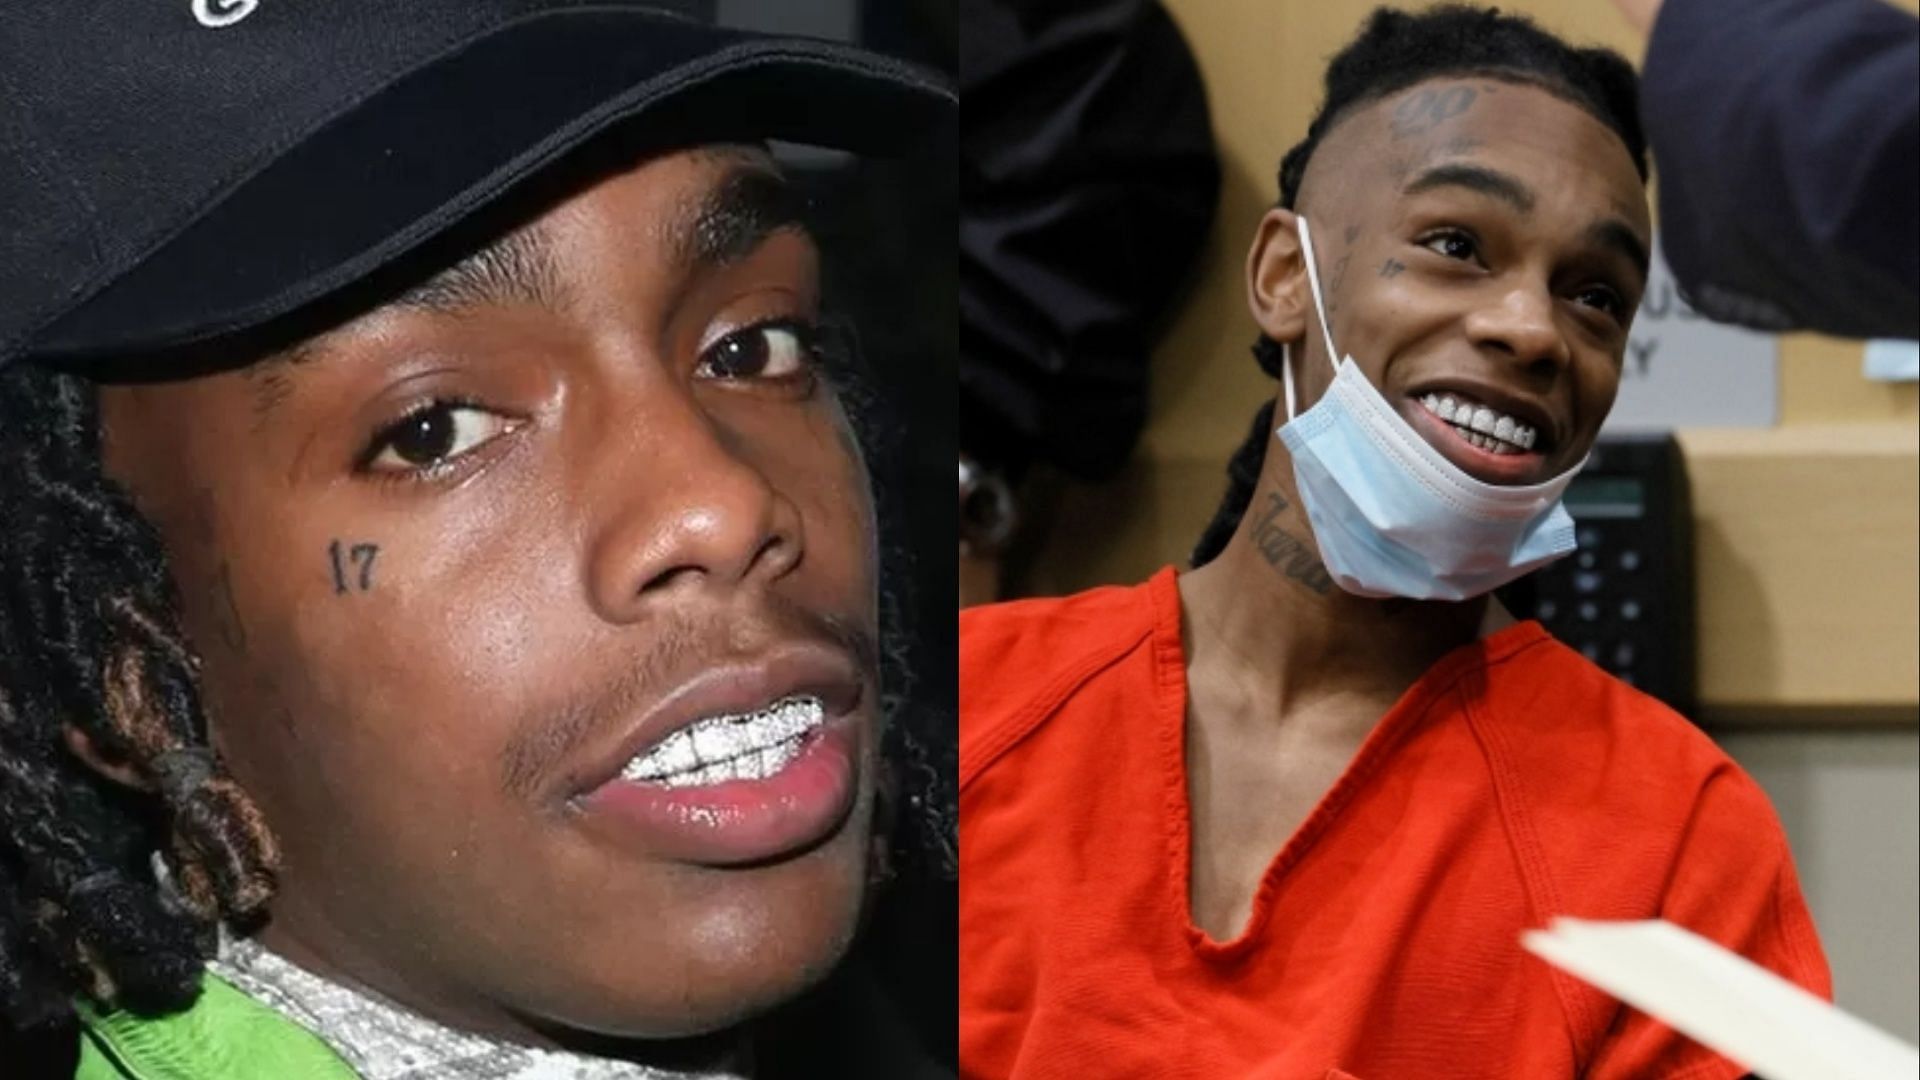 YNW Melly Who is YNW Melly's lawyer? All about the rapper's legal team as death penalty fears